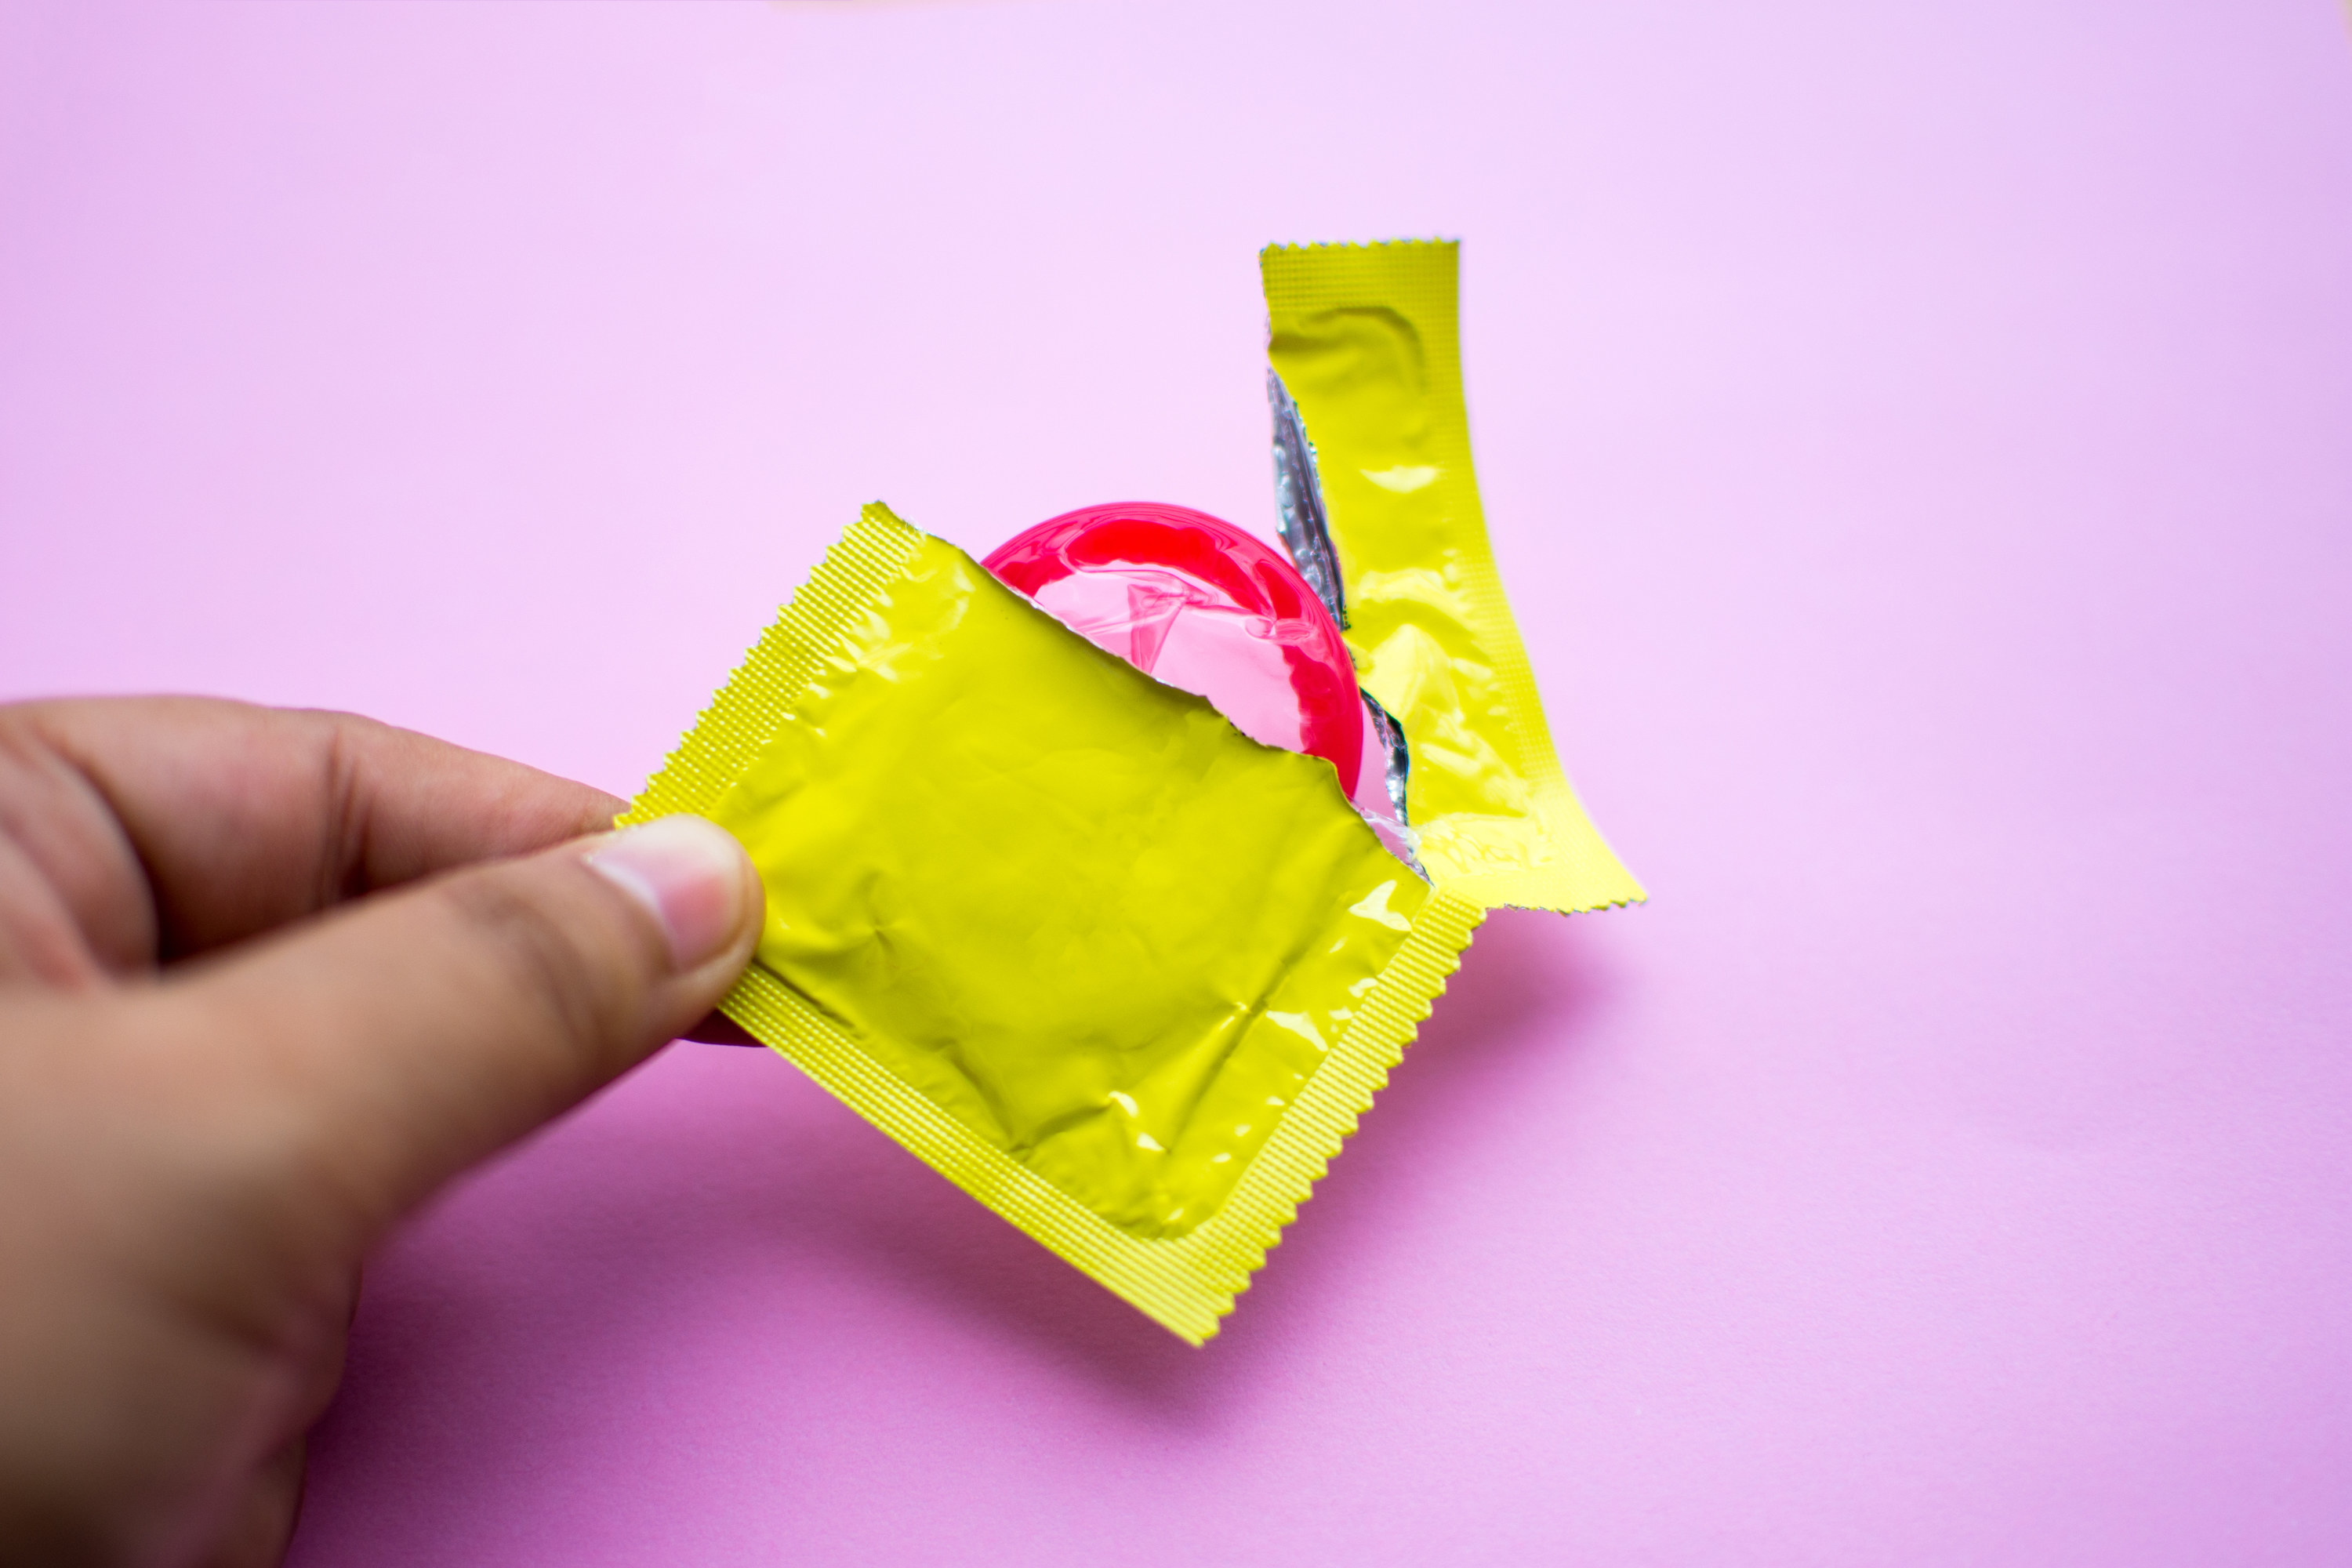 A condom in a wrapper in front of a pink background